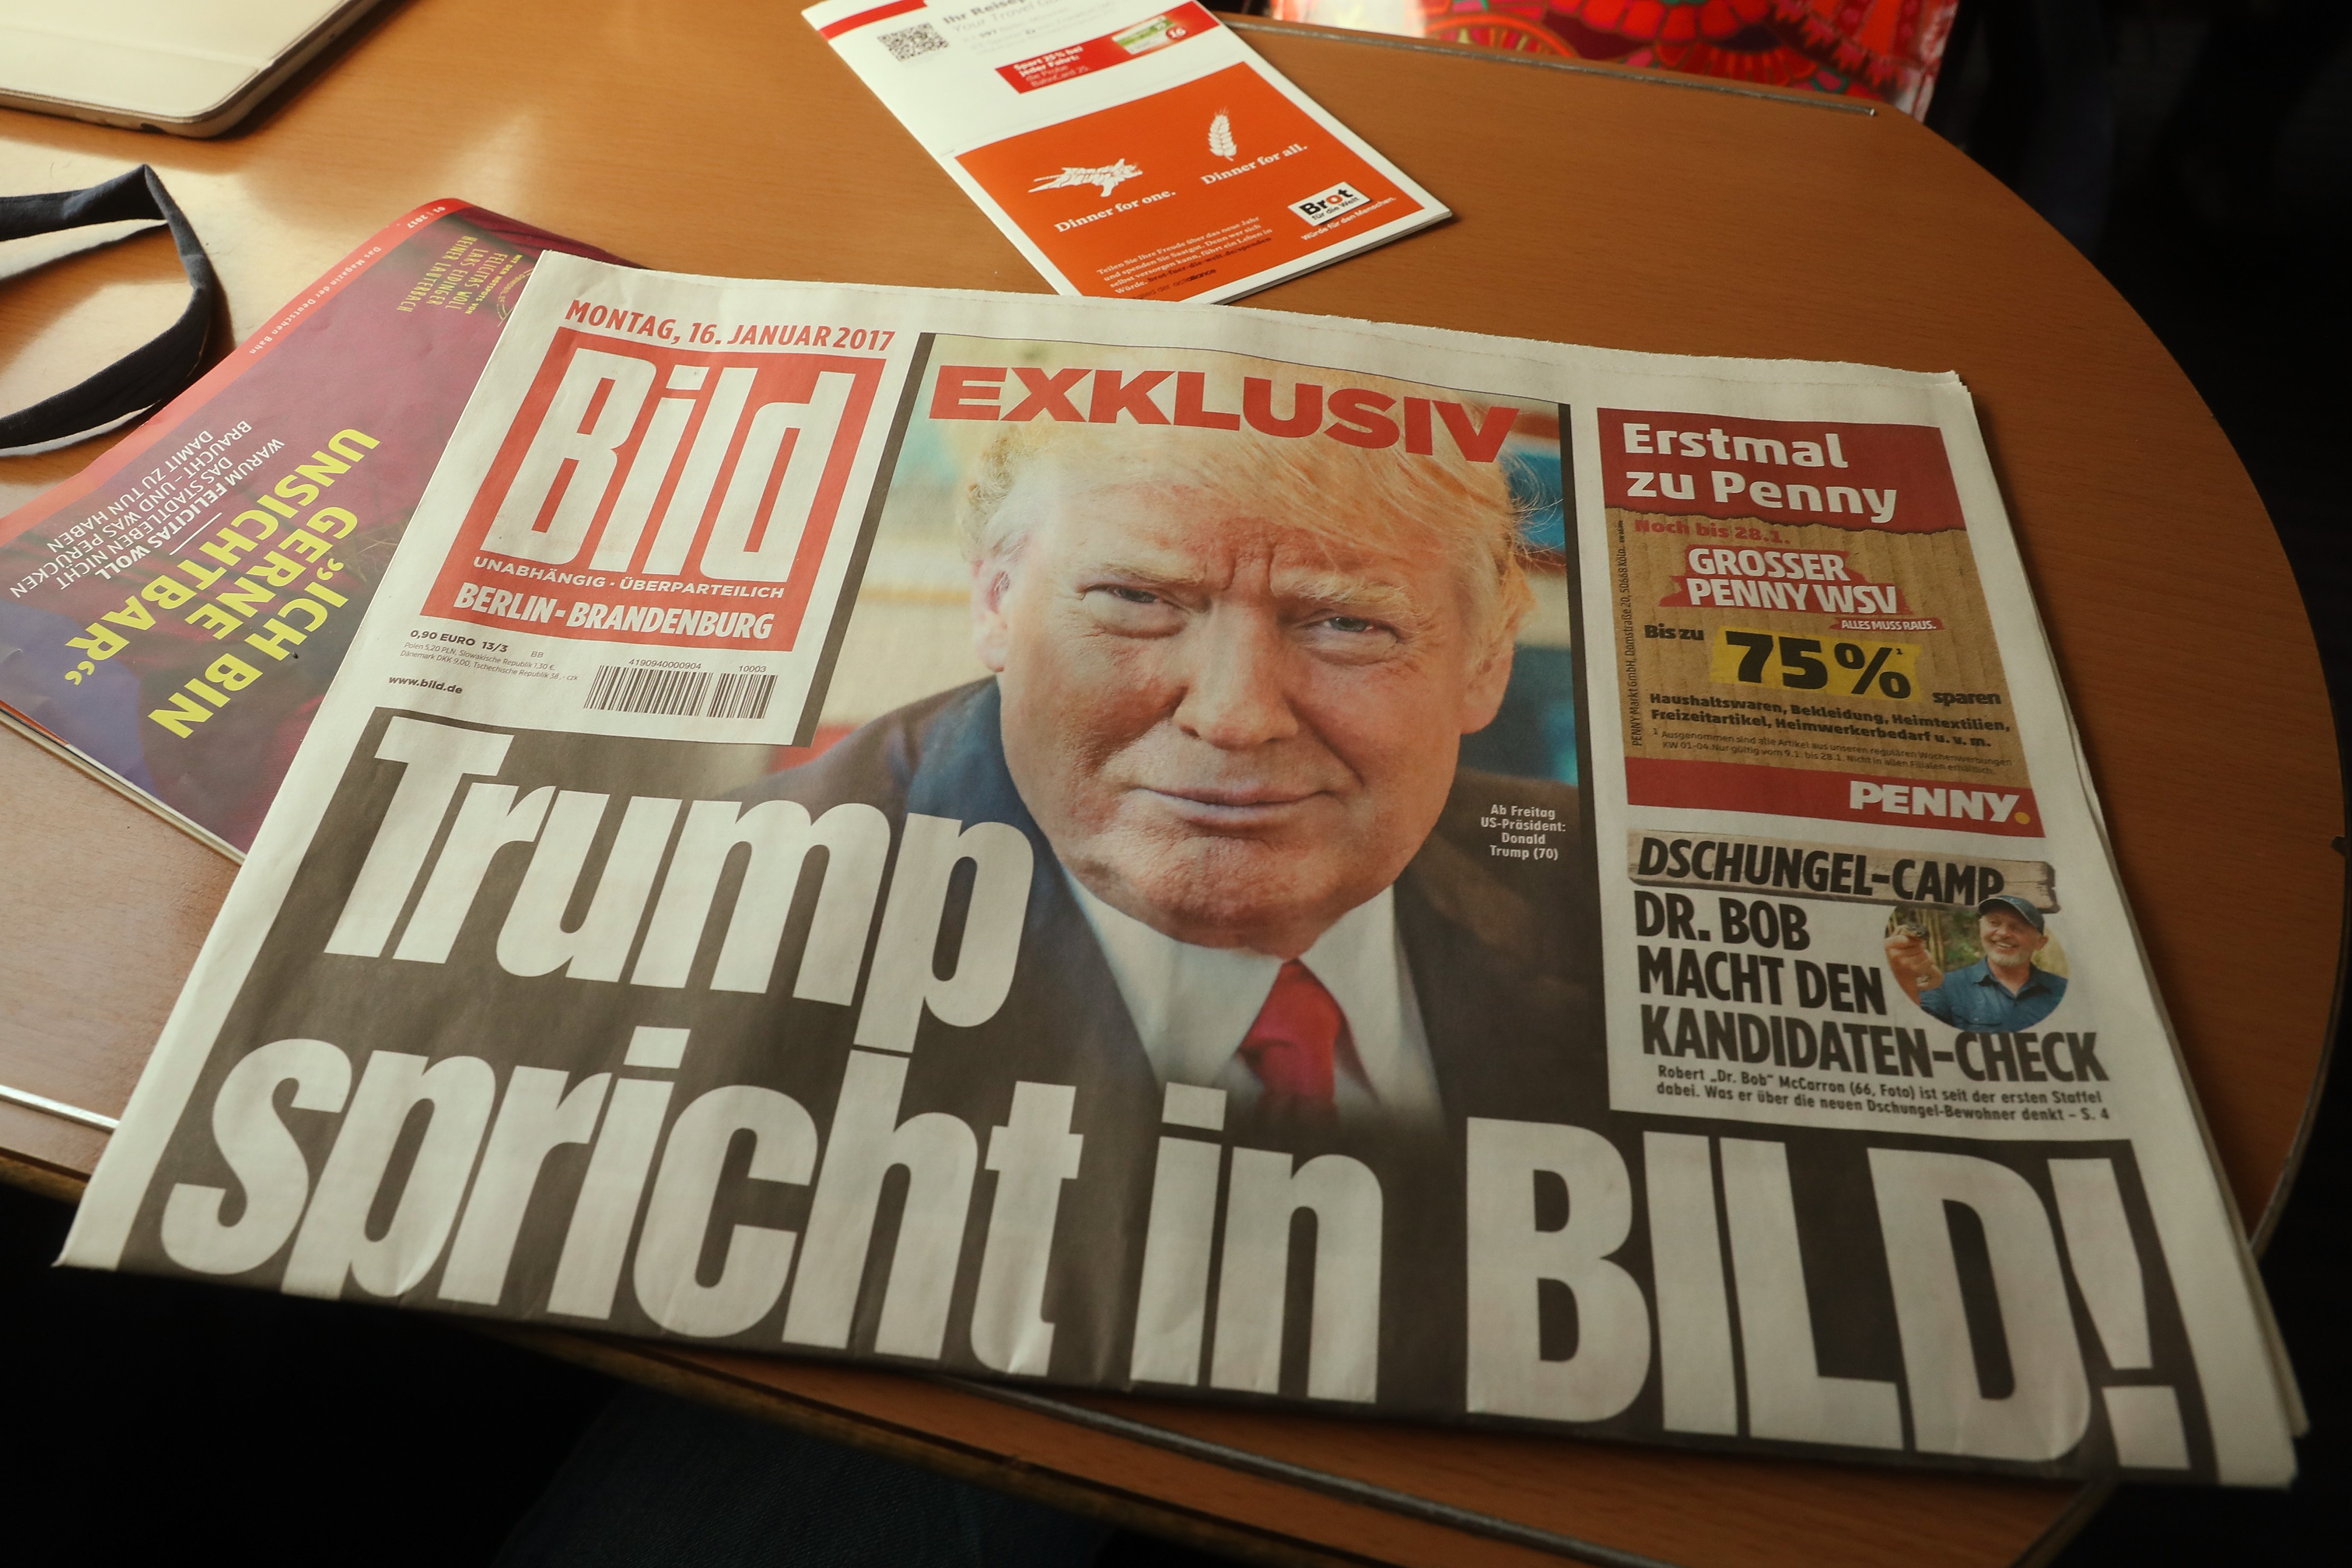 In this photo illustration a copy of the January 16 issue of German tabloid Bild Zeitung that features an exclusive interview with U.S. President-elect Donald Trump lies on a table in a train on January 16, 2017 in Berlin, Germany.